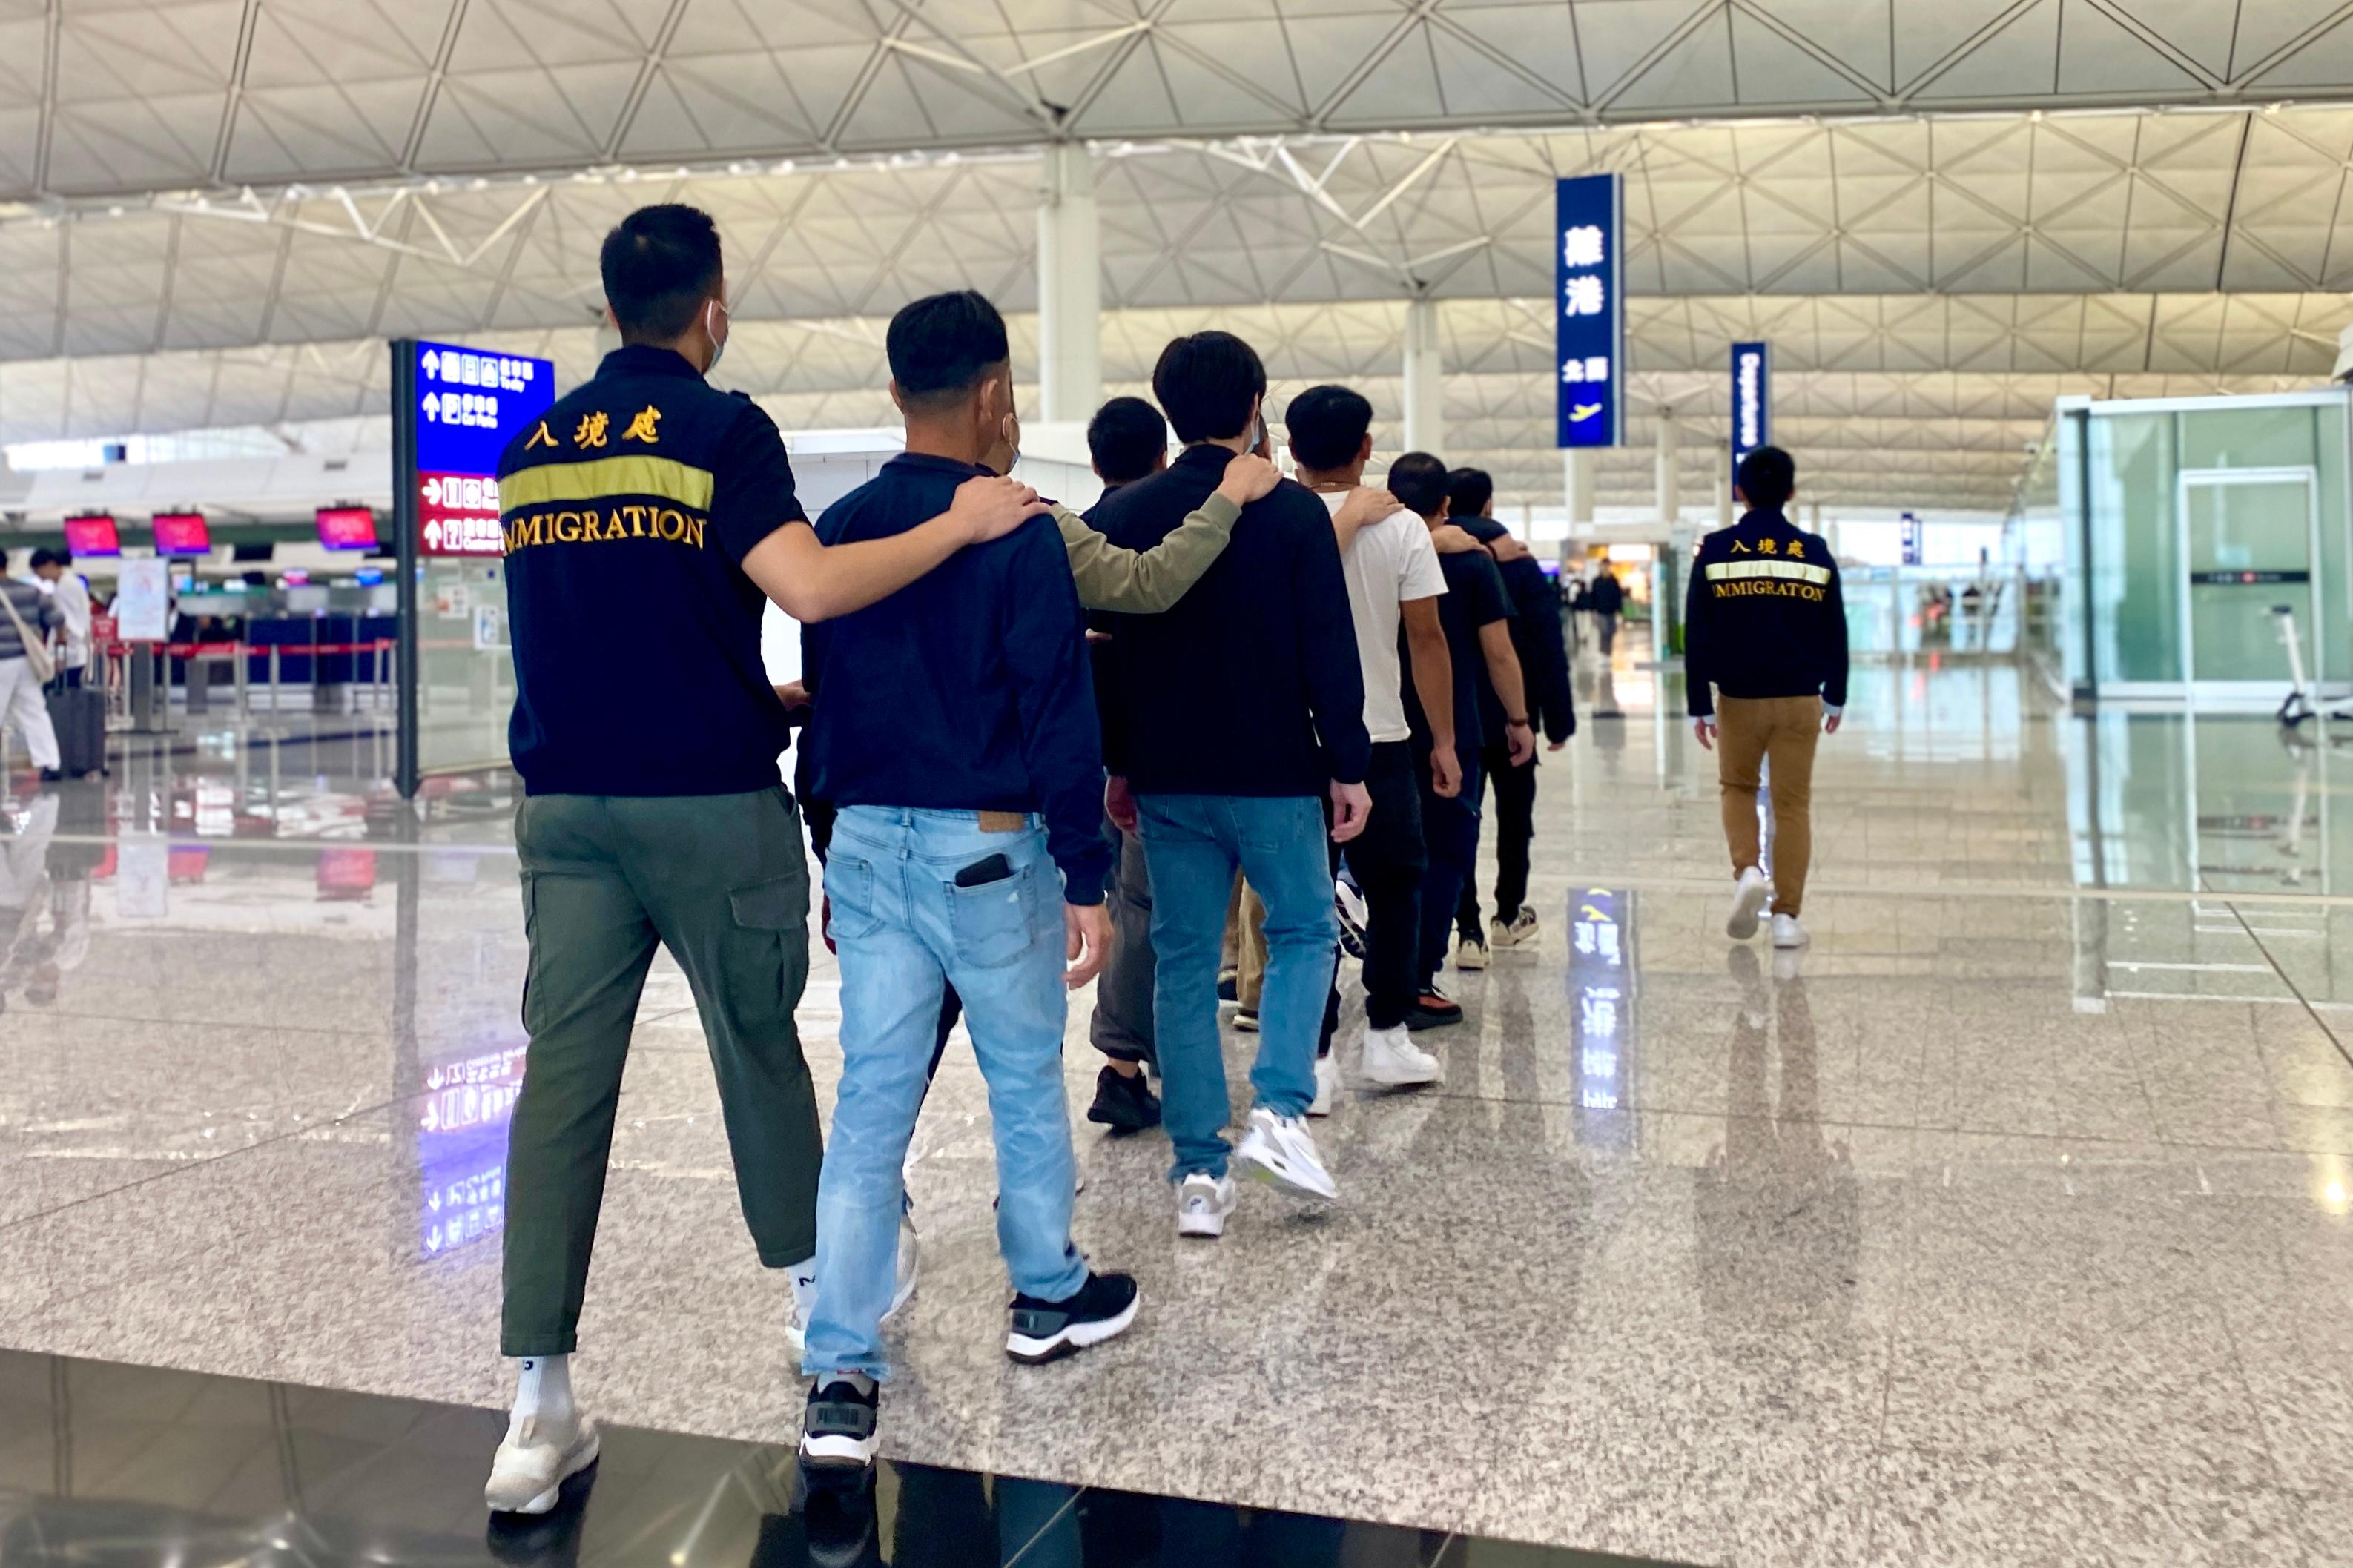 The Immigration Department (ImmD) carried out a repatriation operation today (November 29). A total of 24 Vietnamese illegal immigrants were repatriated to Vietnam. Photo shows removees being escorted by ImmD officers to depart from Hong Kong.